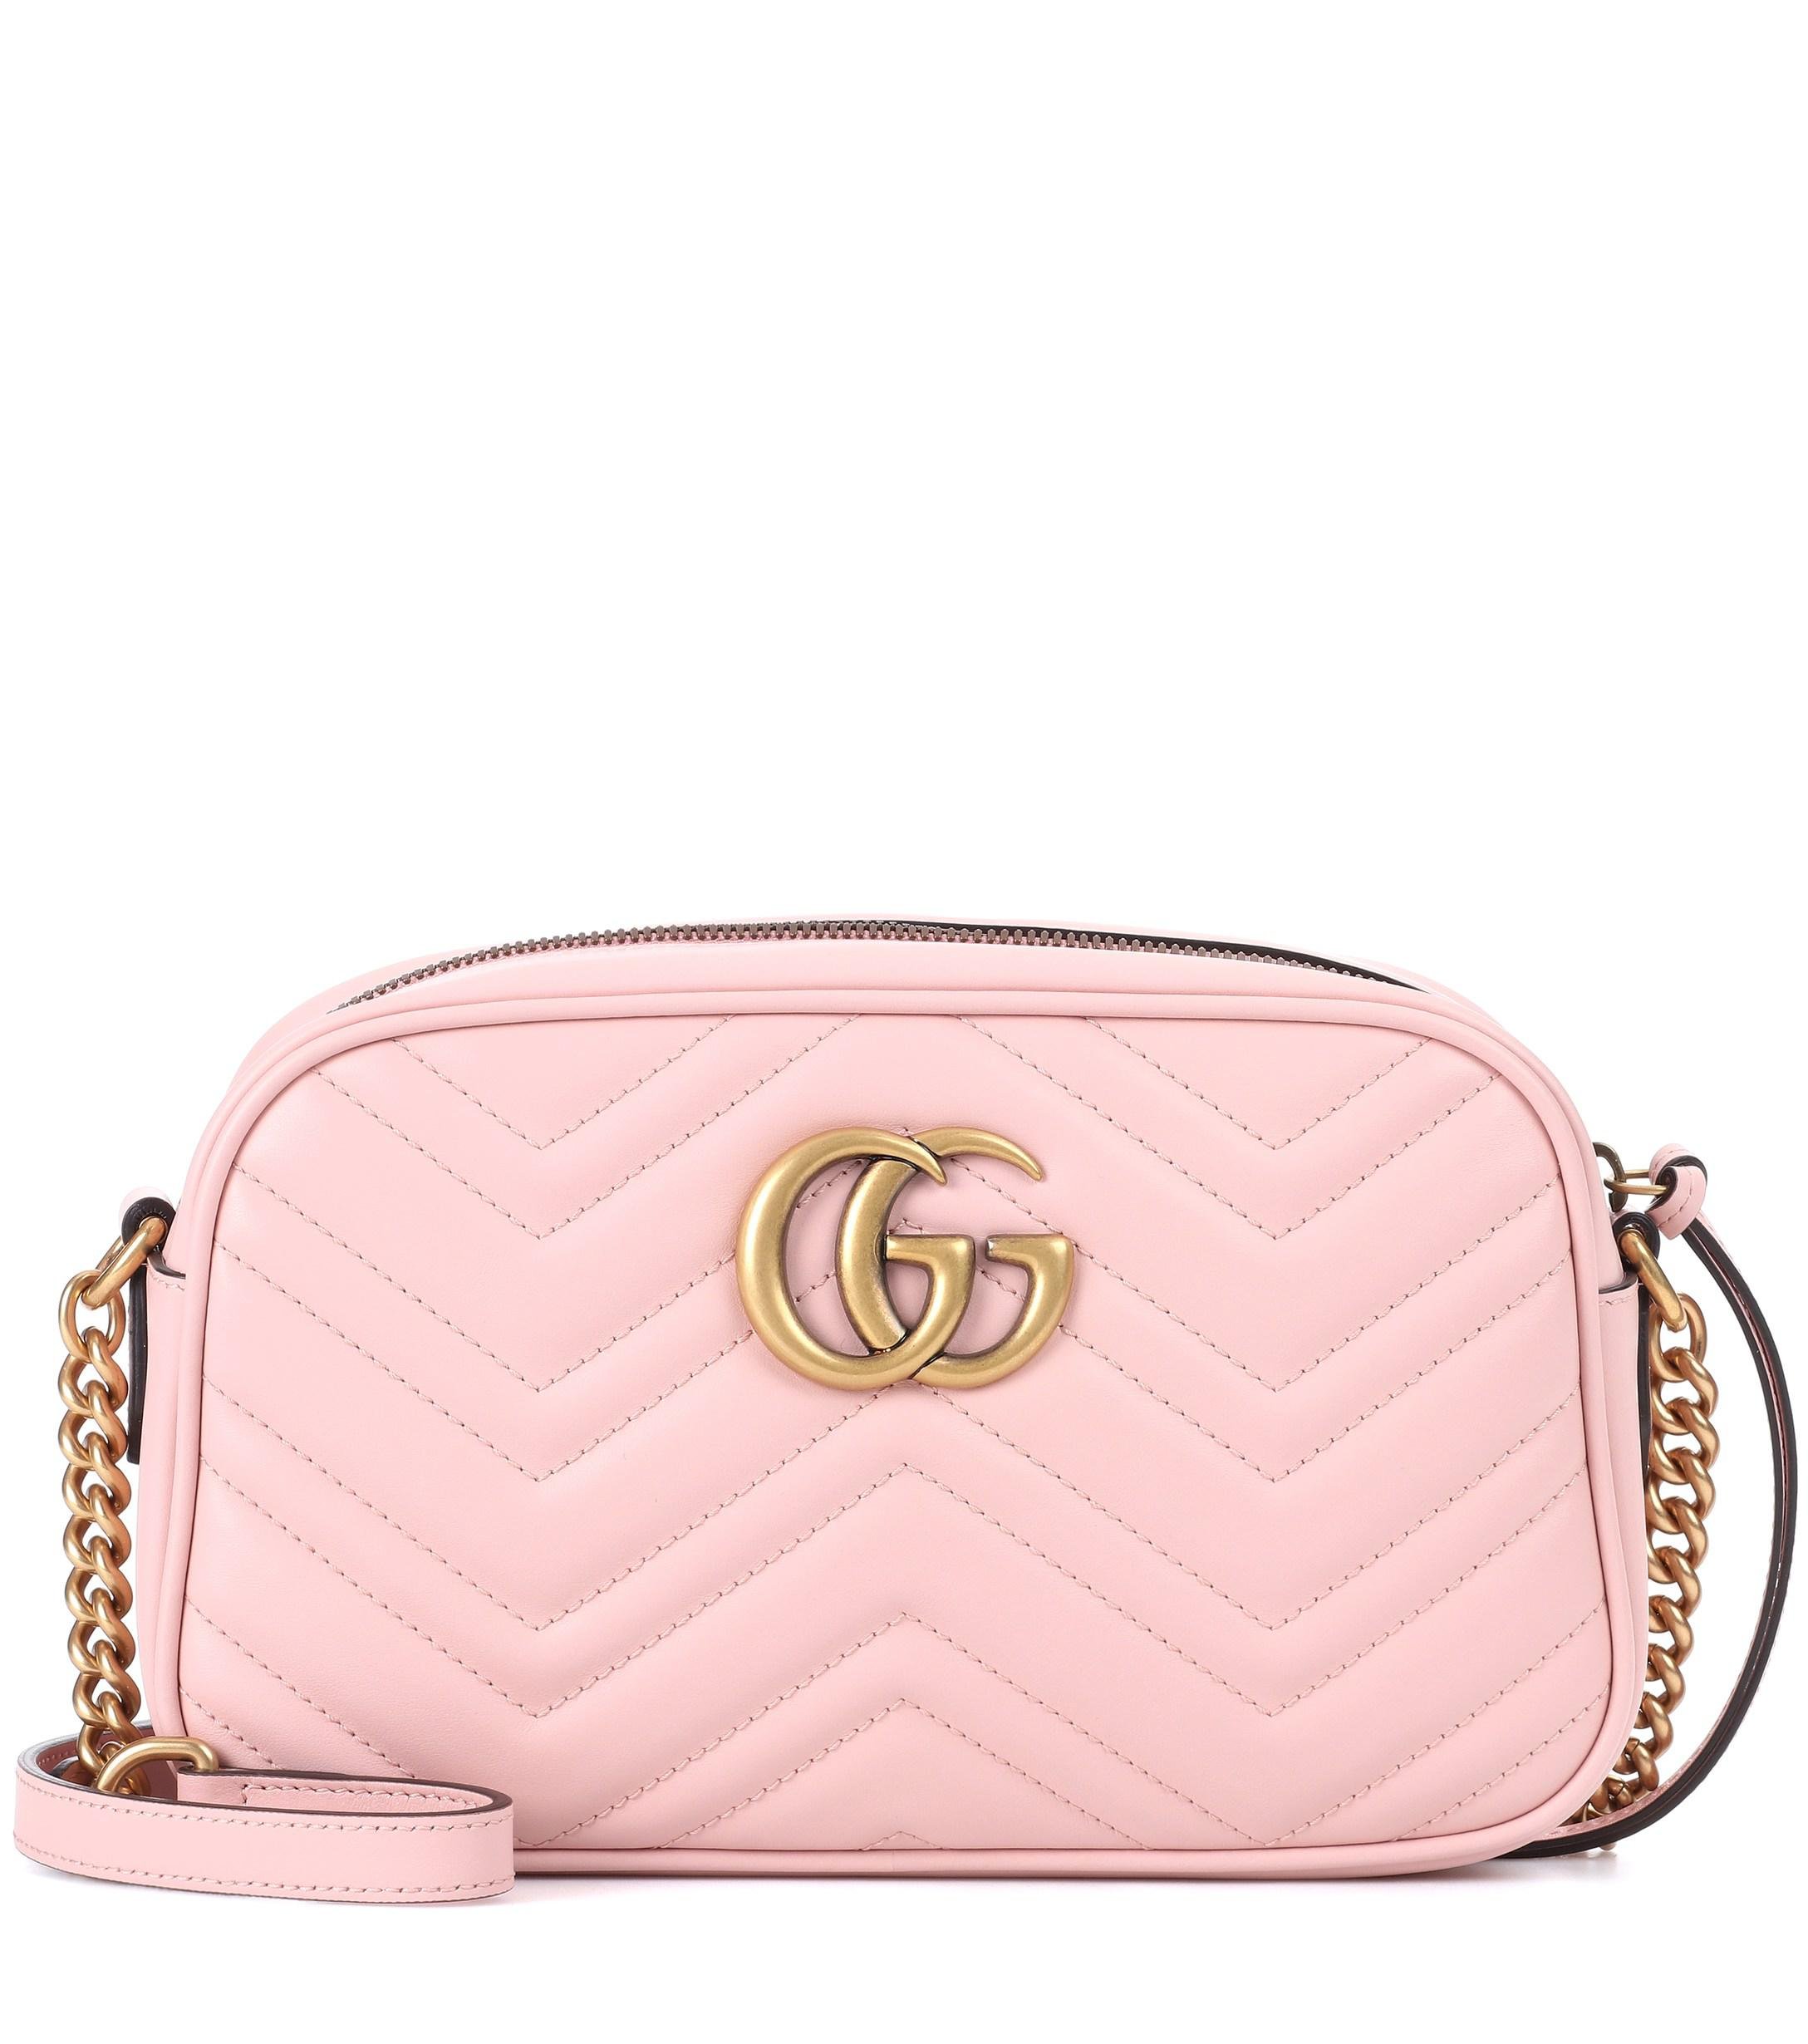 Gucci GG Marmont Leather Crossbody Bag in Pink - Lyst